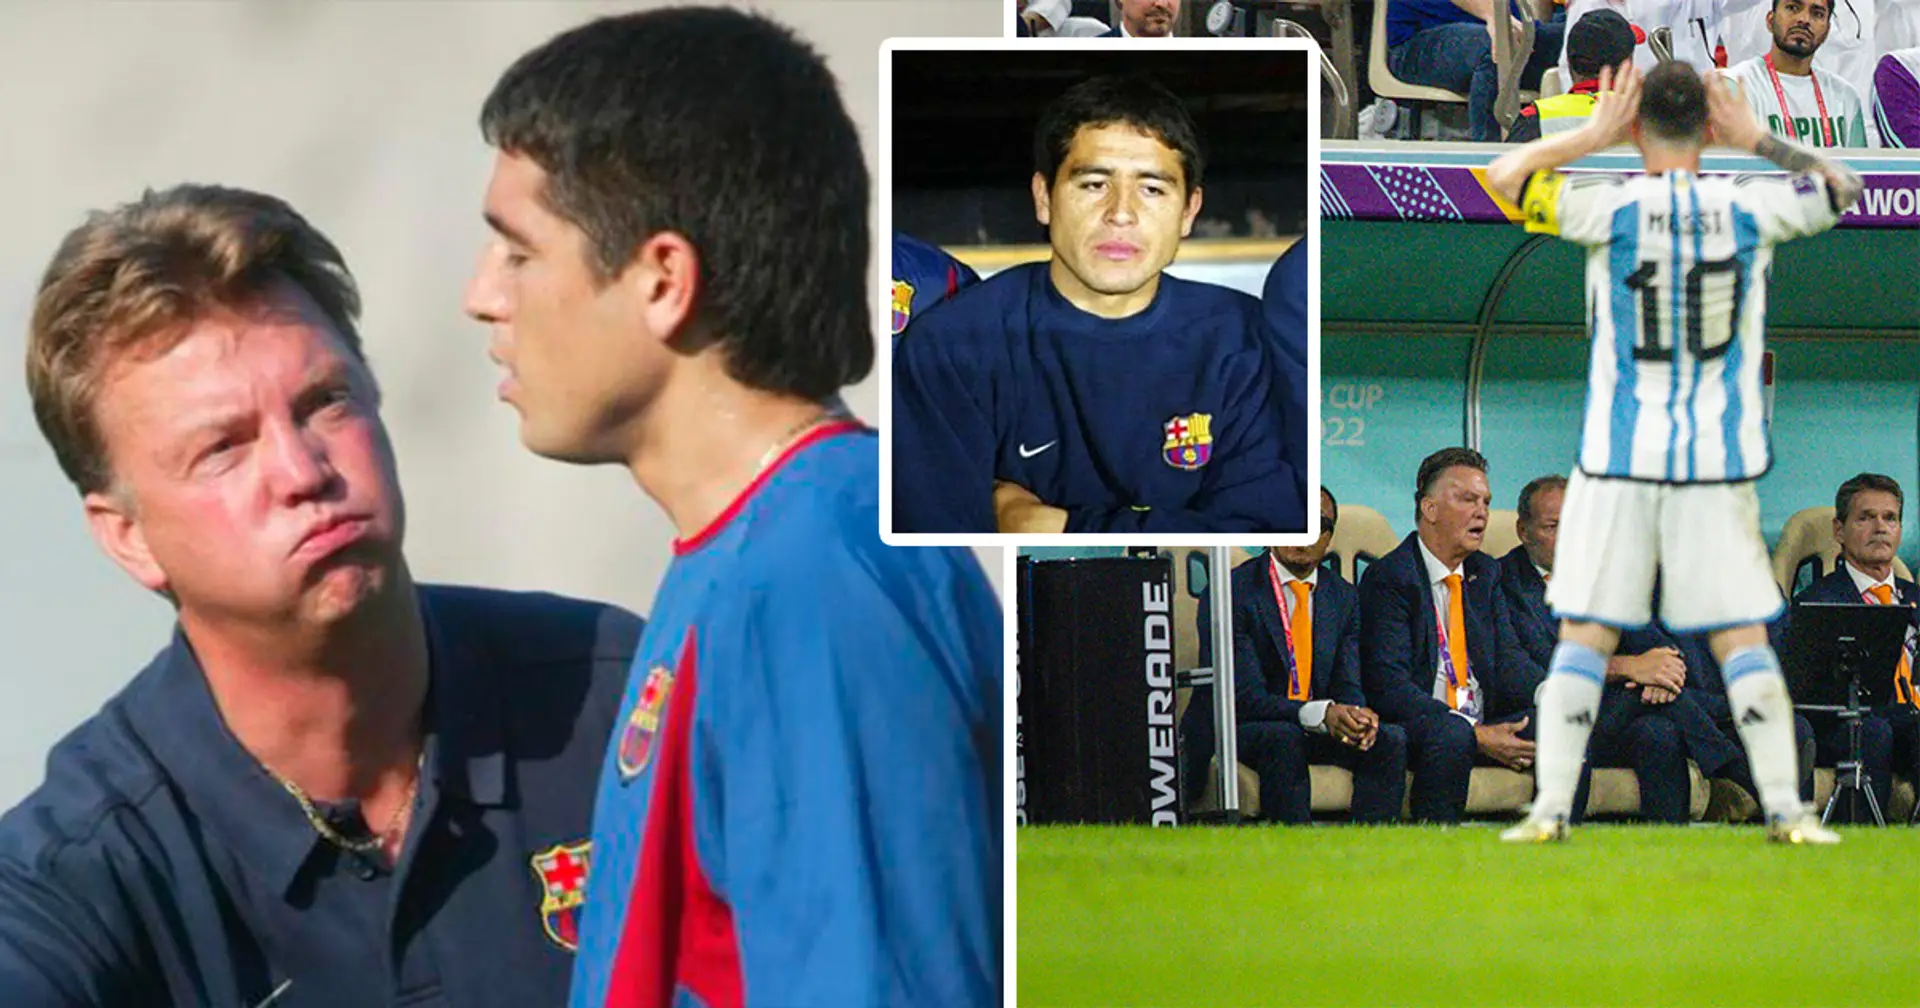 'Riquelme didn't triumph at Barca because he had a ****head like Van Gaal as his coach': The real reason behind Messi's celebration in front of Van Gaal 